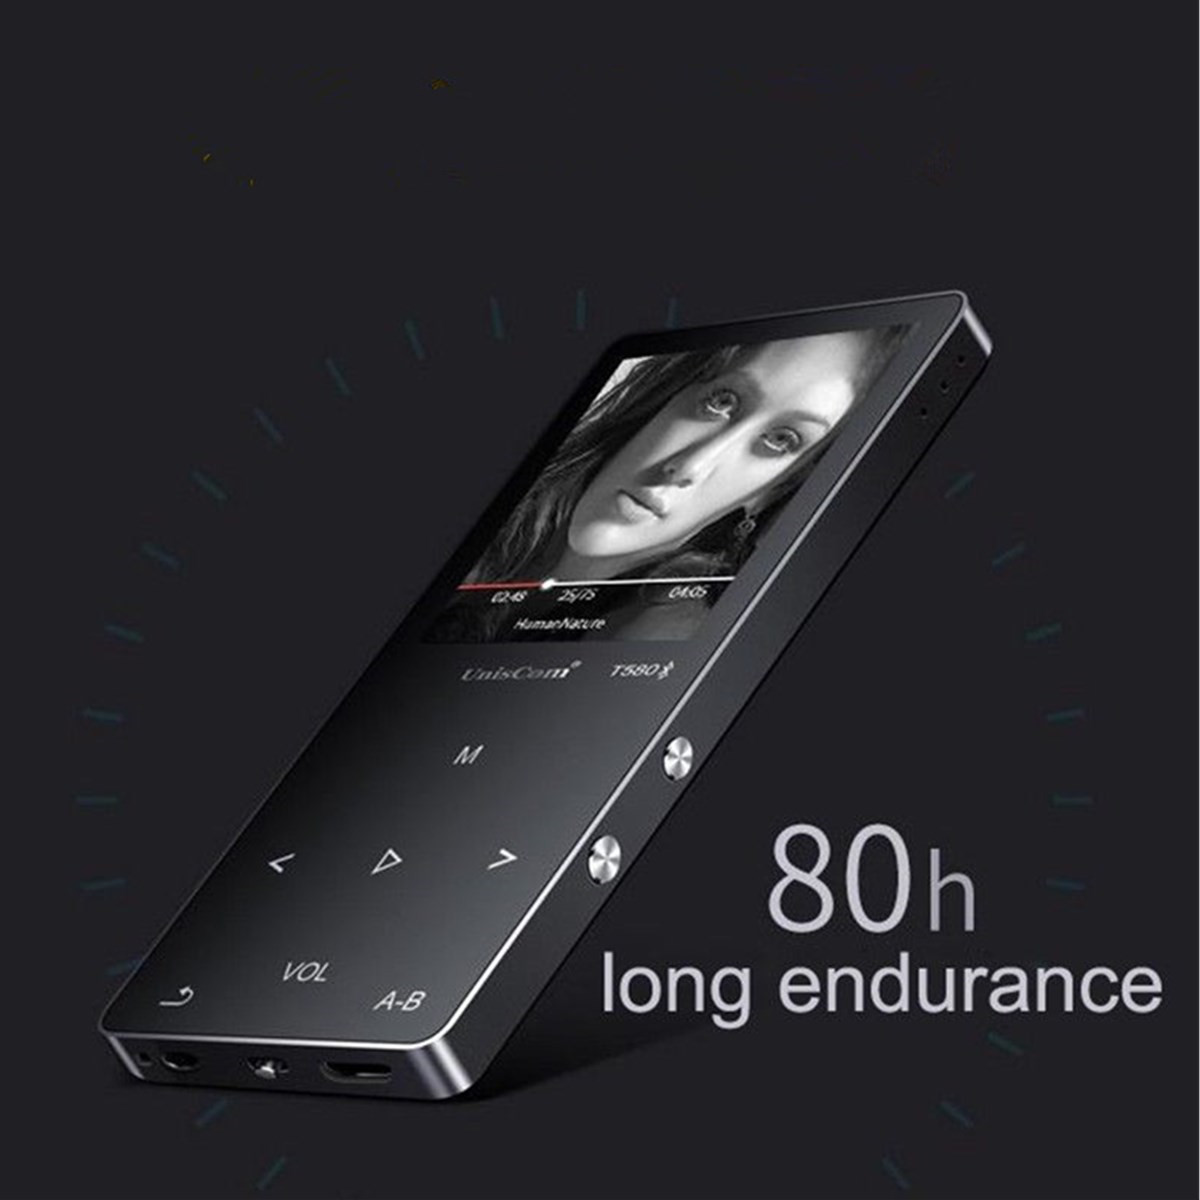 Uniscom 8G 1.8 Inch Screen bluetooth Lossless HIFI MP3 Music Player Support A-B Repeat Voice Record 20